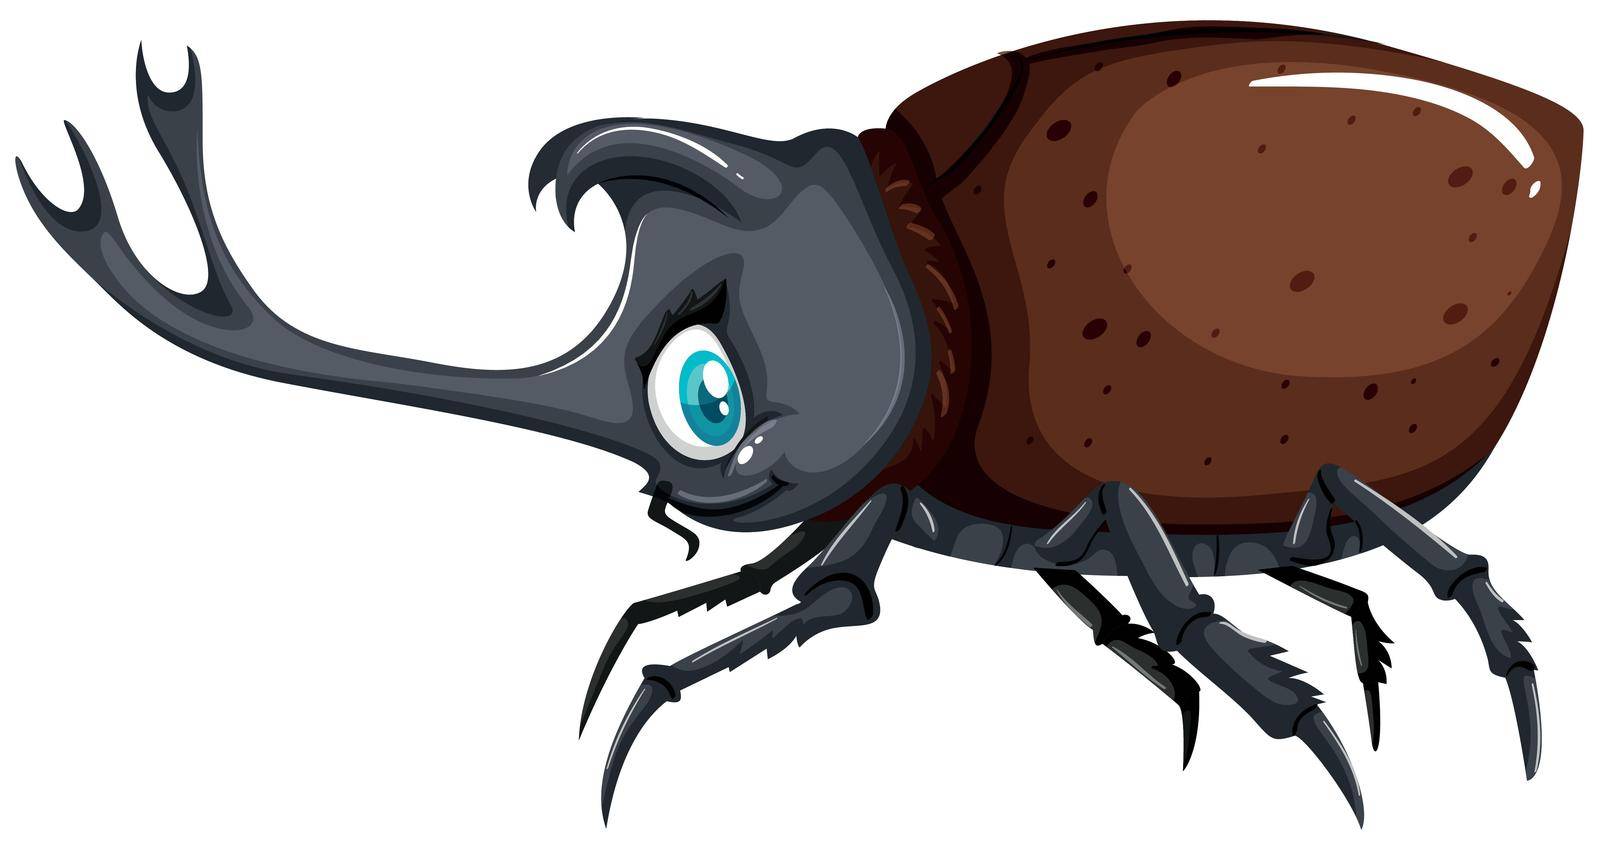 Beetle with brown shell illustration